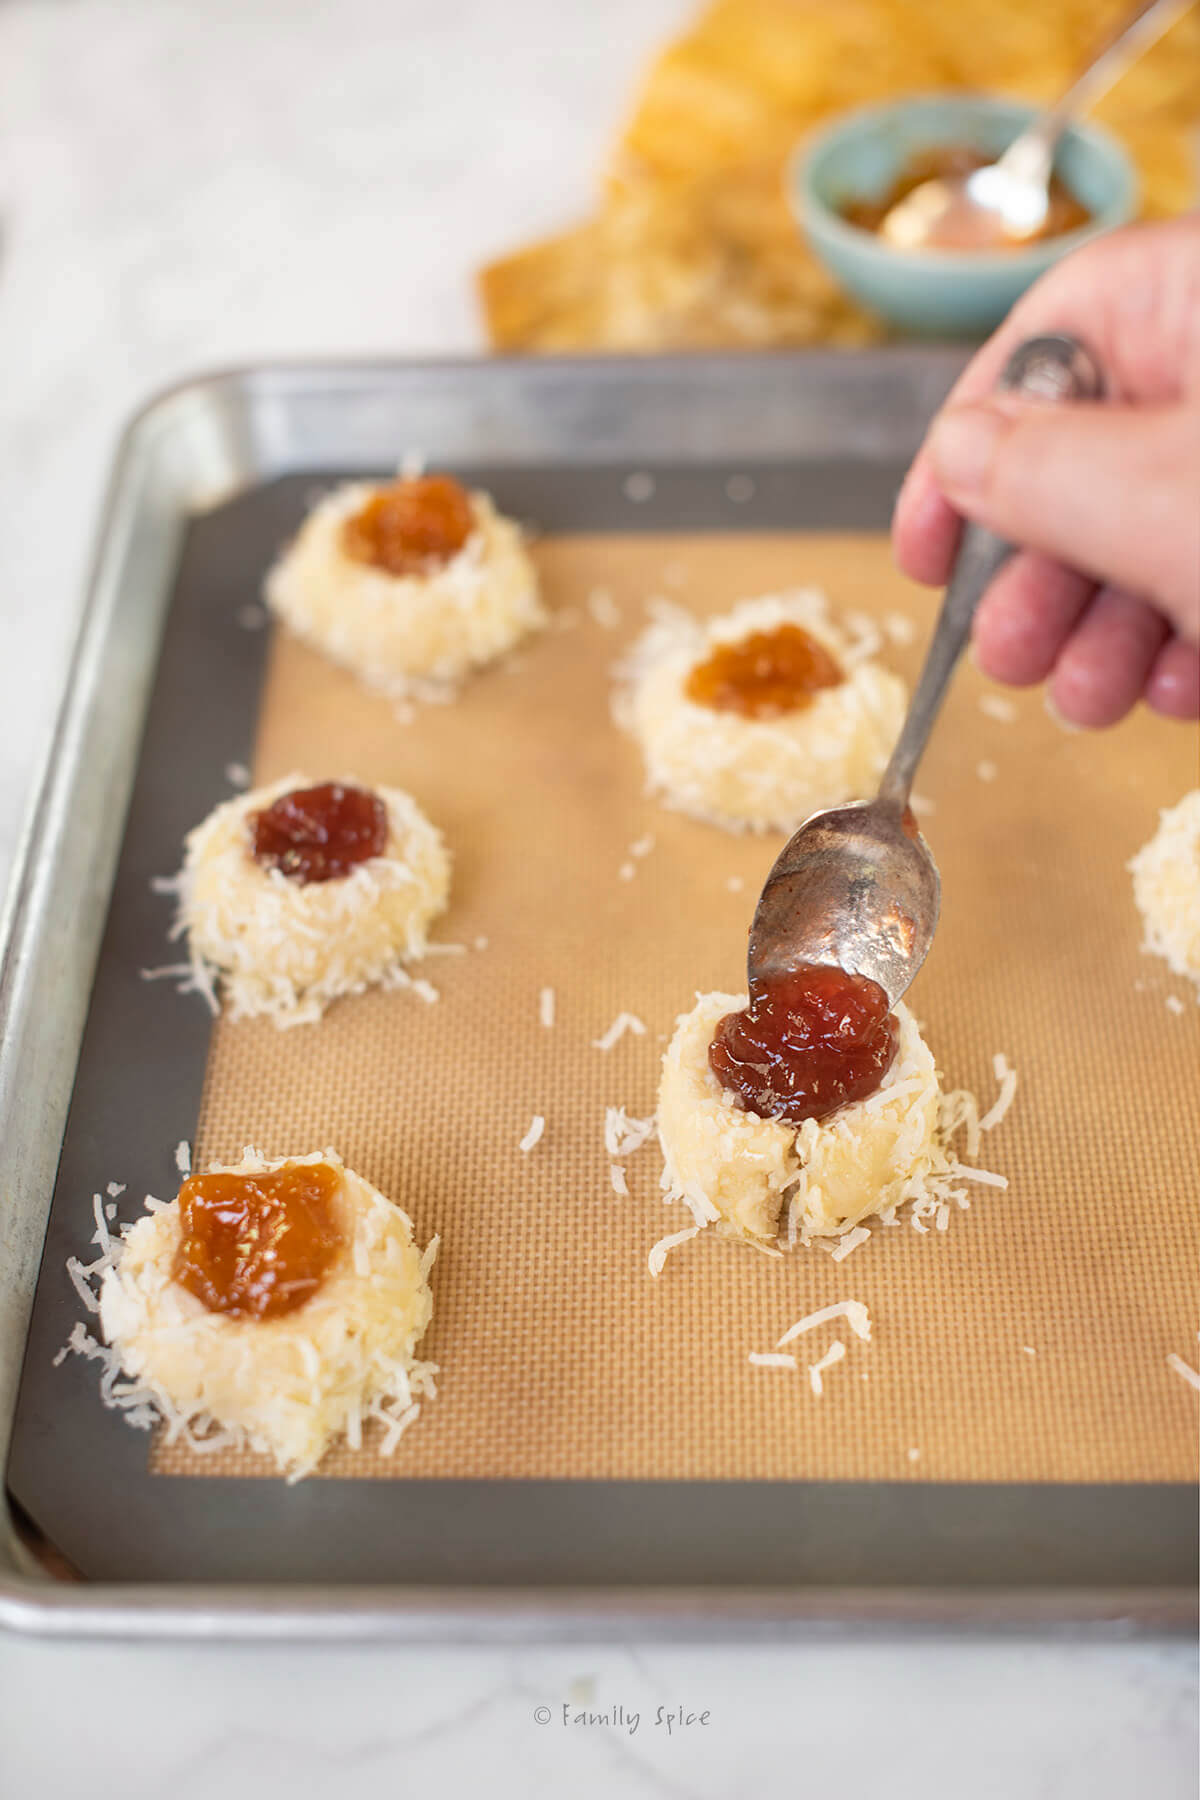 A hand spooning jam into well of coconut thumbprint cookies on a baking sheet